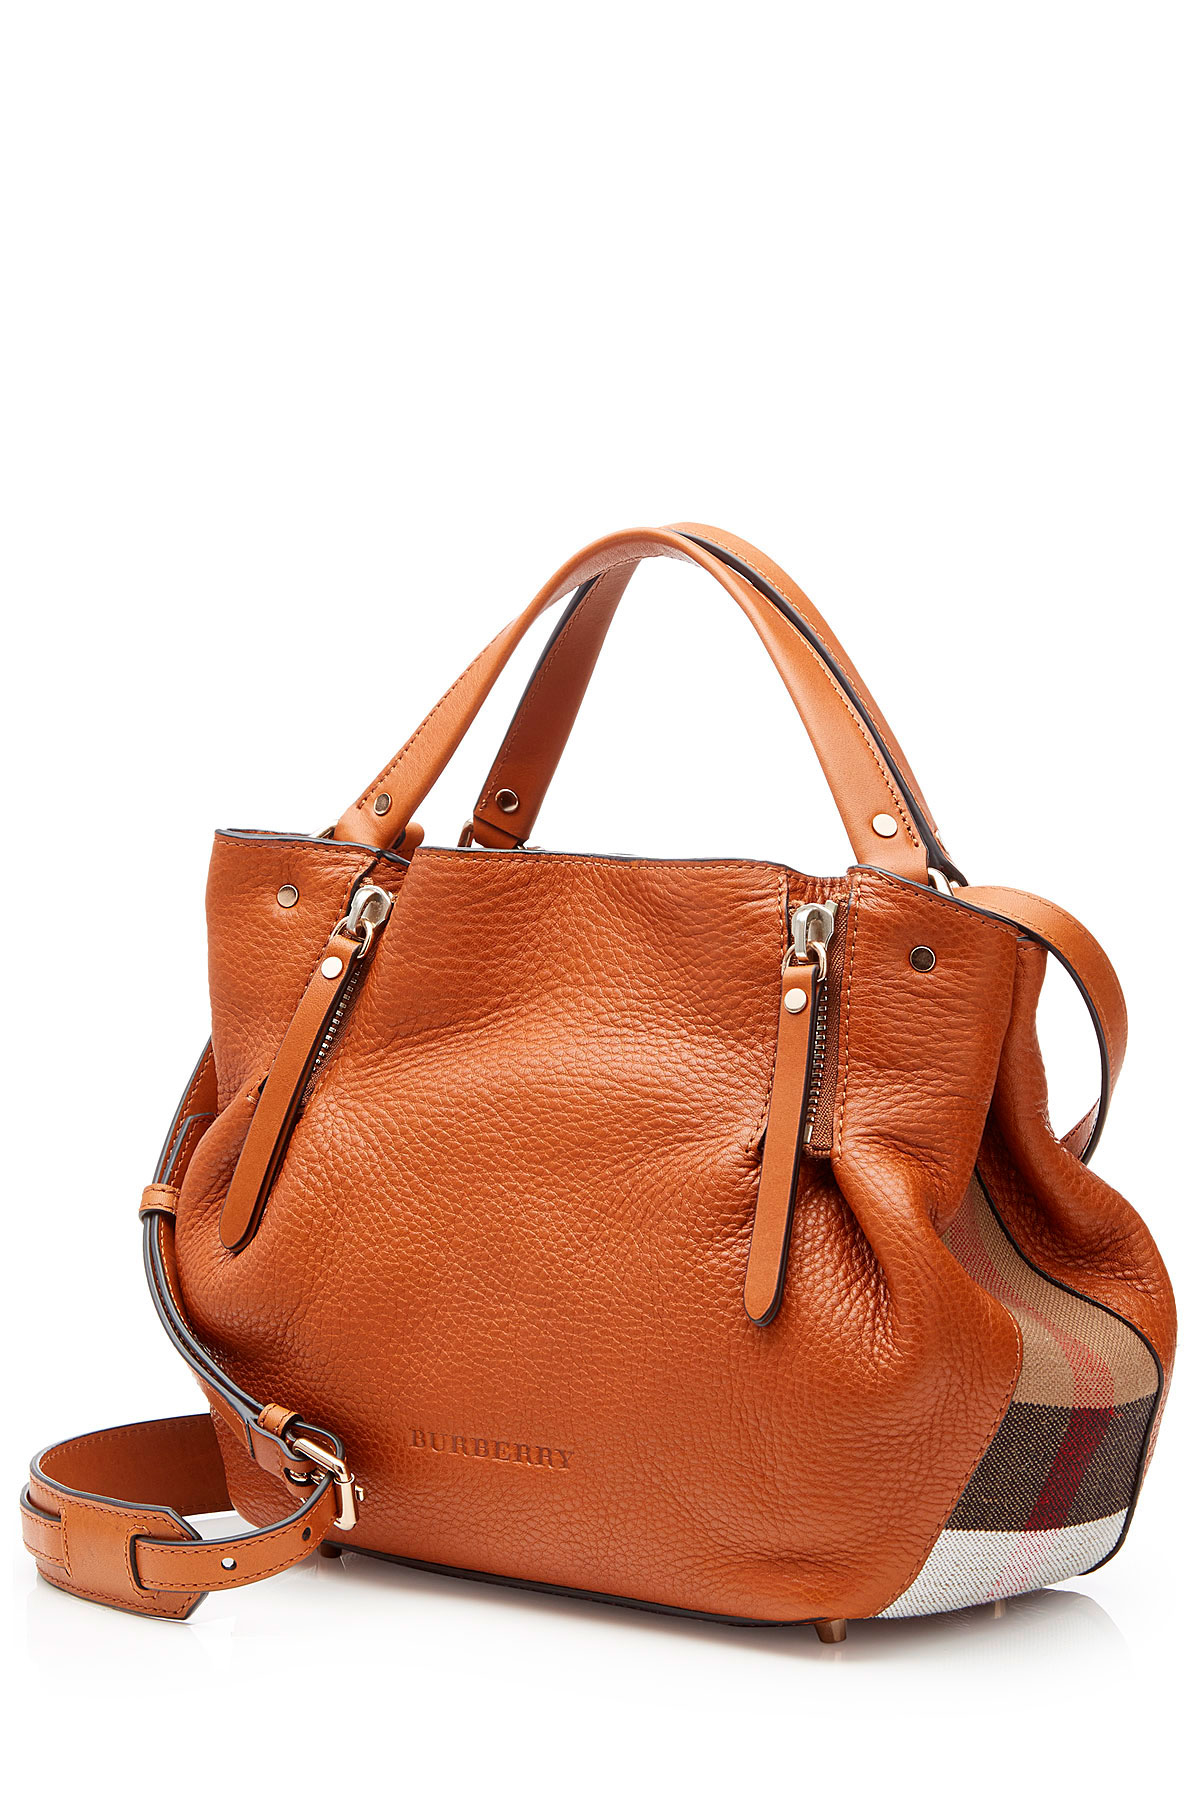 Burberry Leather Shoulder Bag With Printed Fabric - Brown in Brown - Lyst